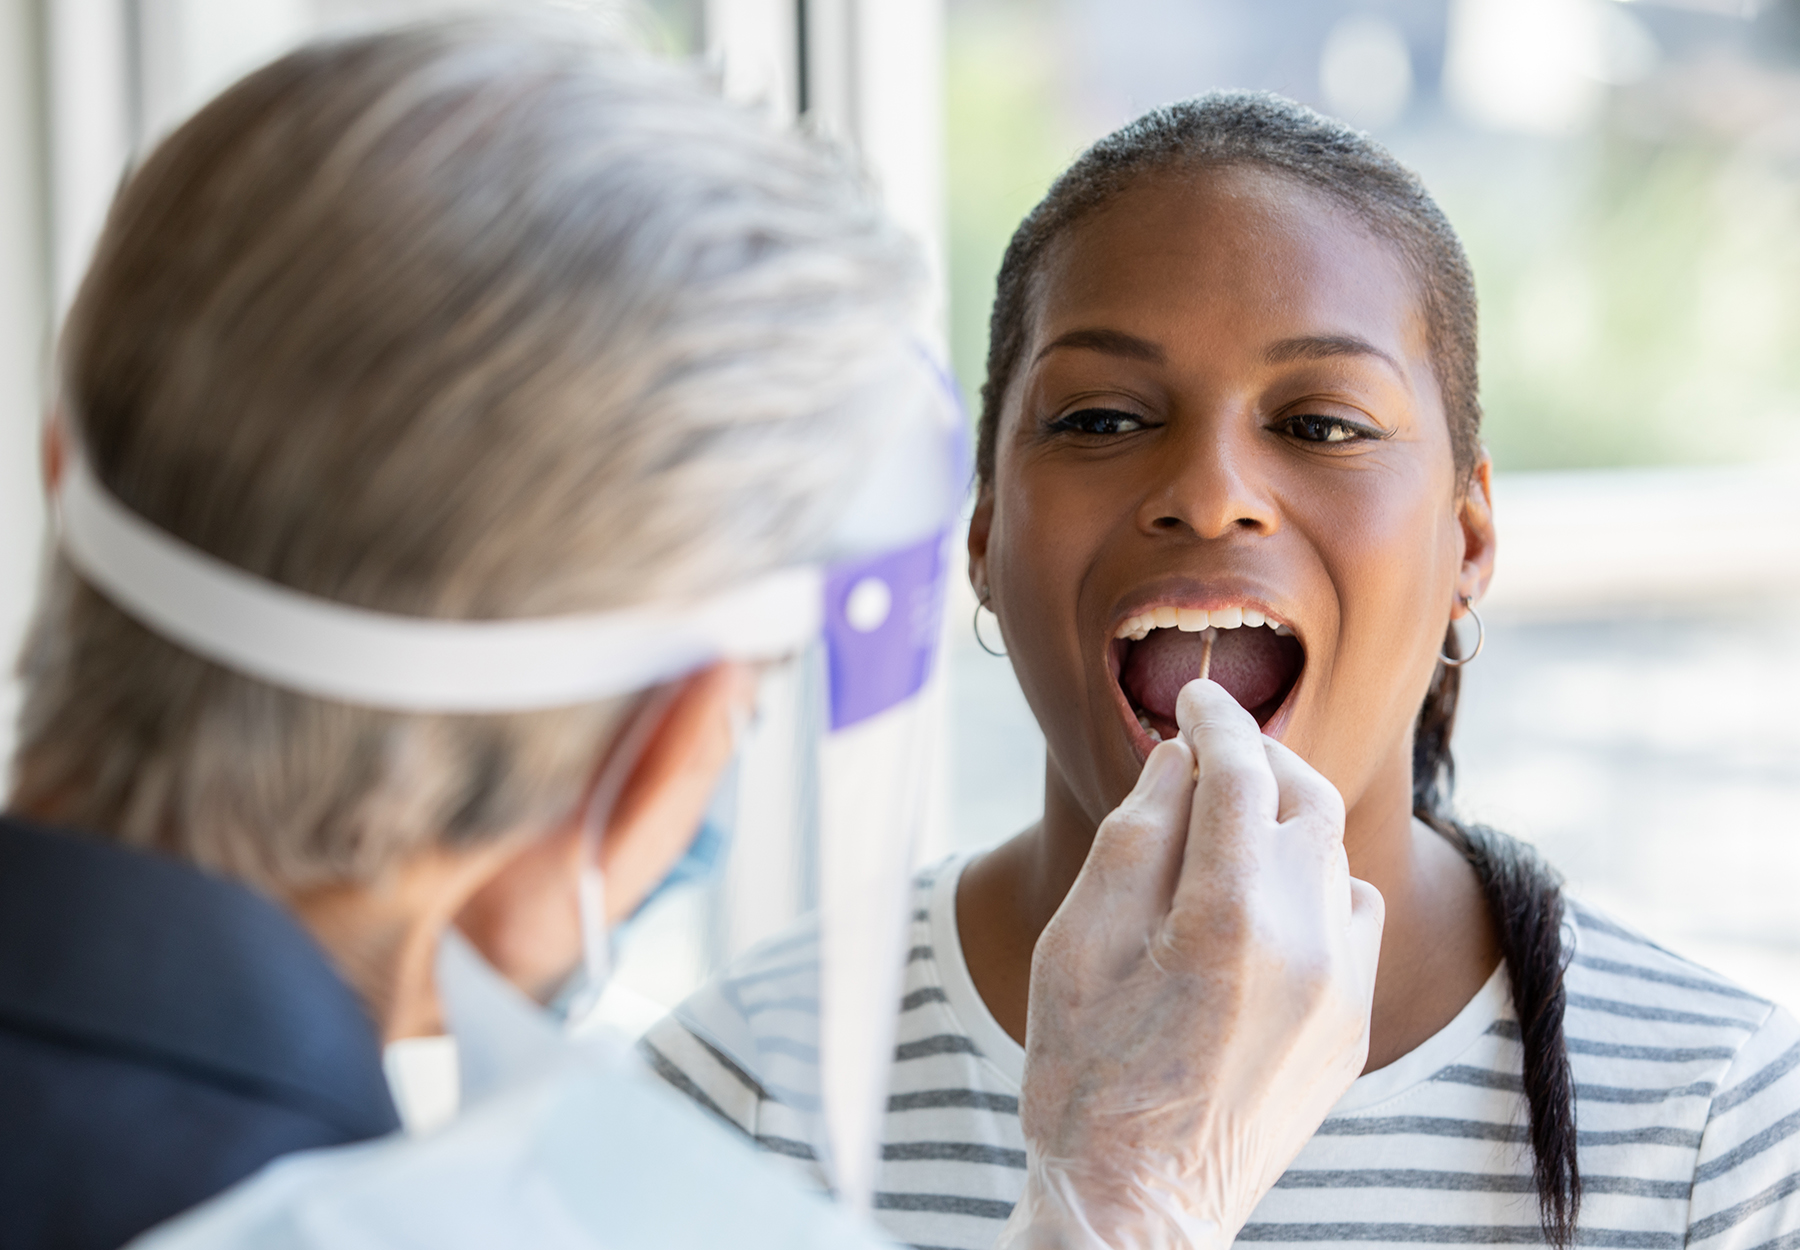 Medical worker with face shield taking a swab sample of a patient's throat. iStock image.